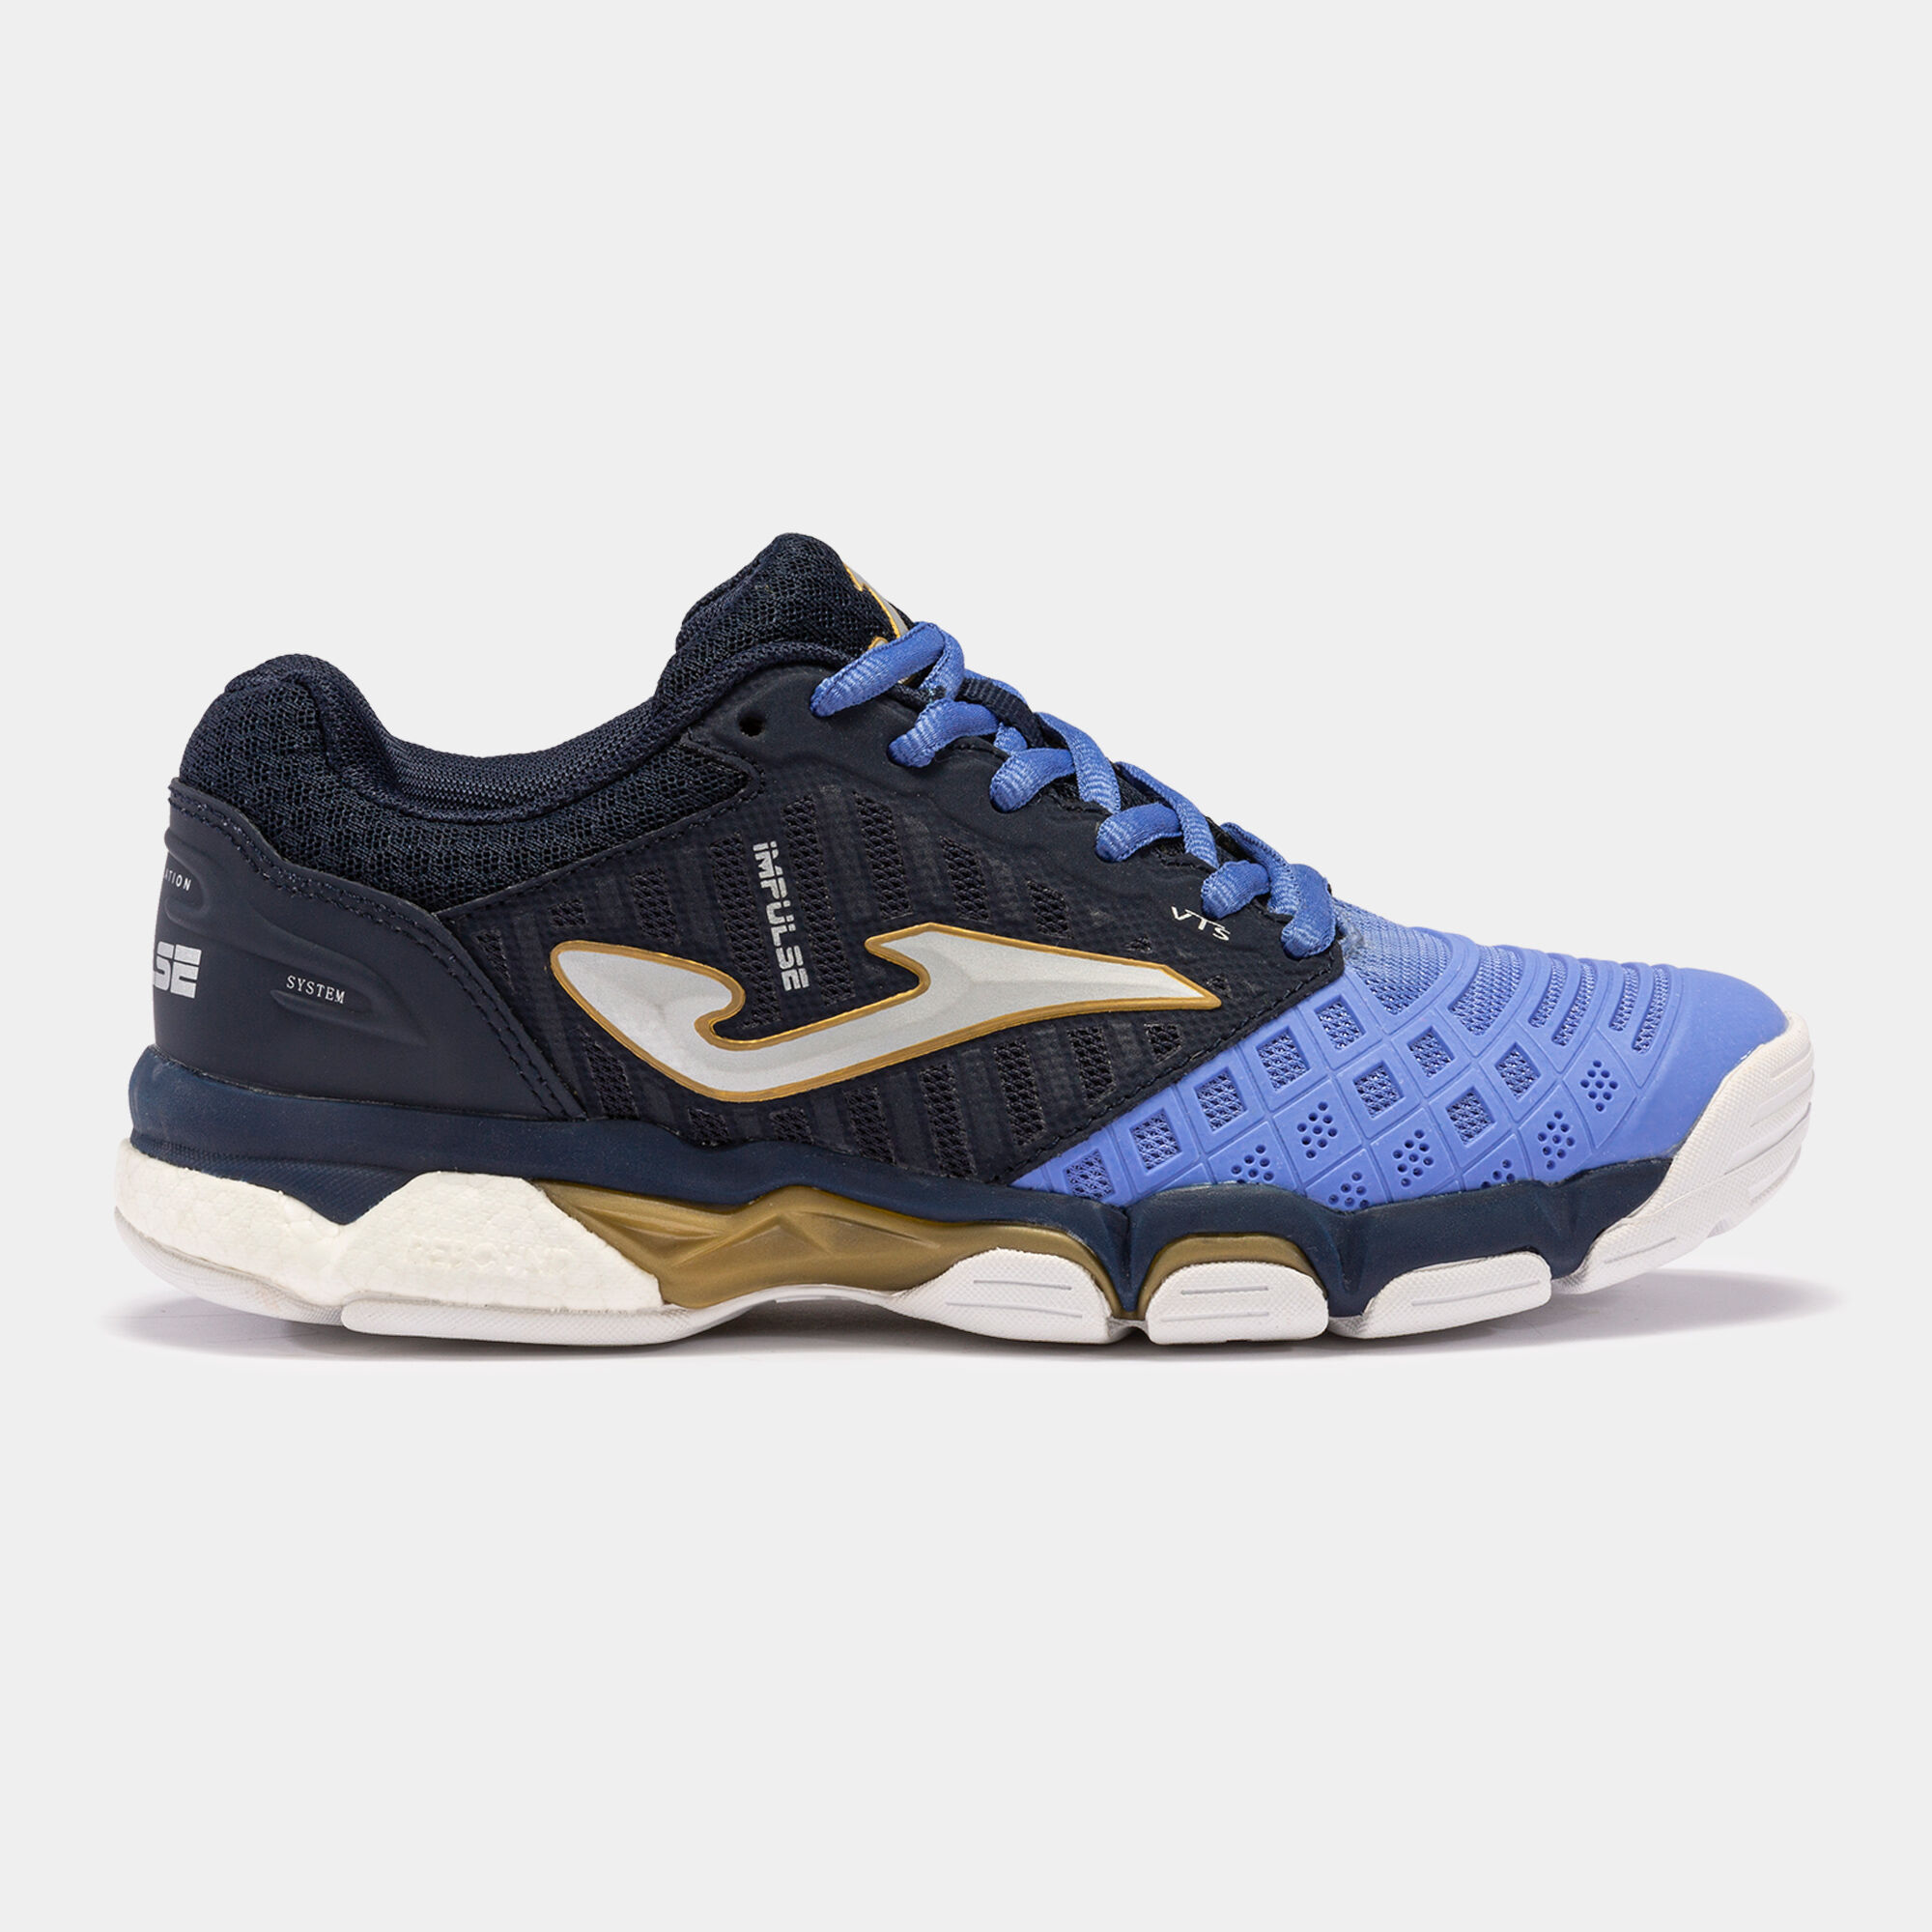 Volleyball shoes V.Impulse Lady 23 woman navy blue royal blue